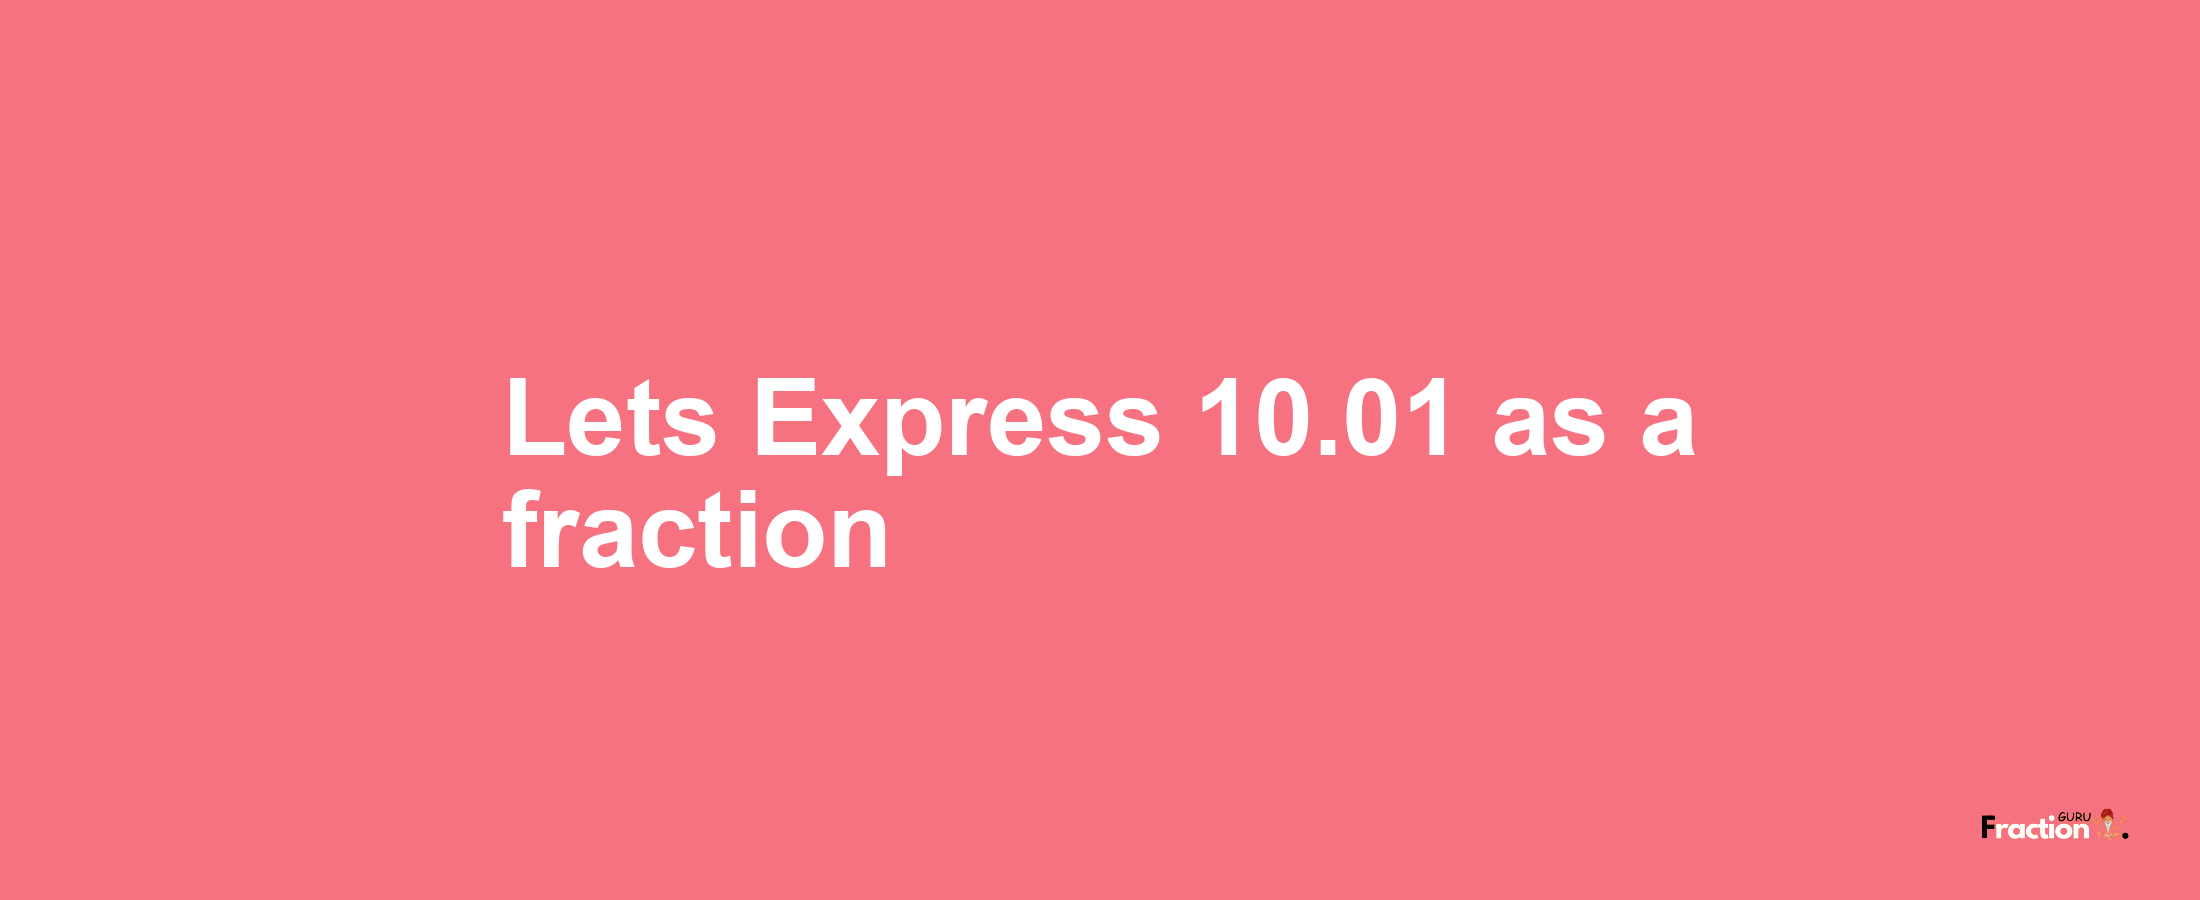 Lets Express 10.01 as afraction